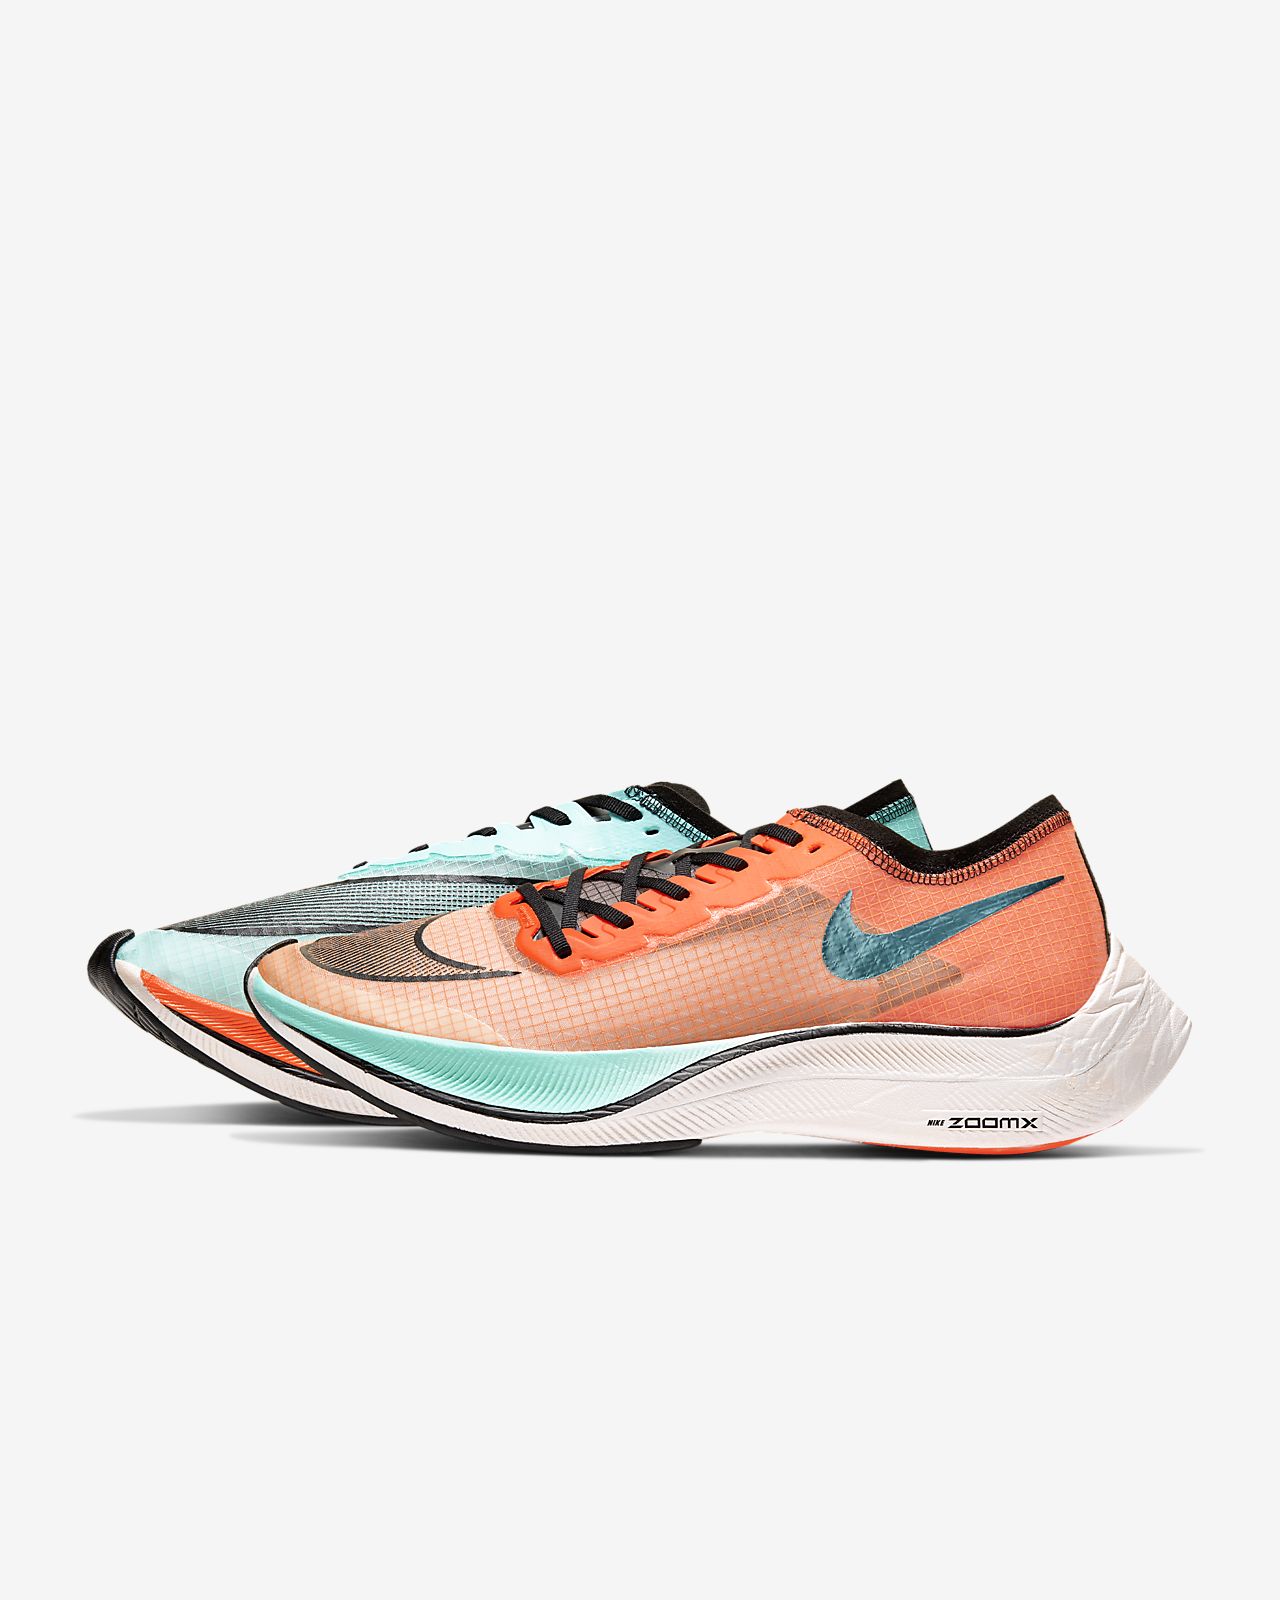 where can i buy vaporfly